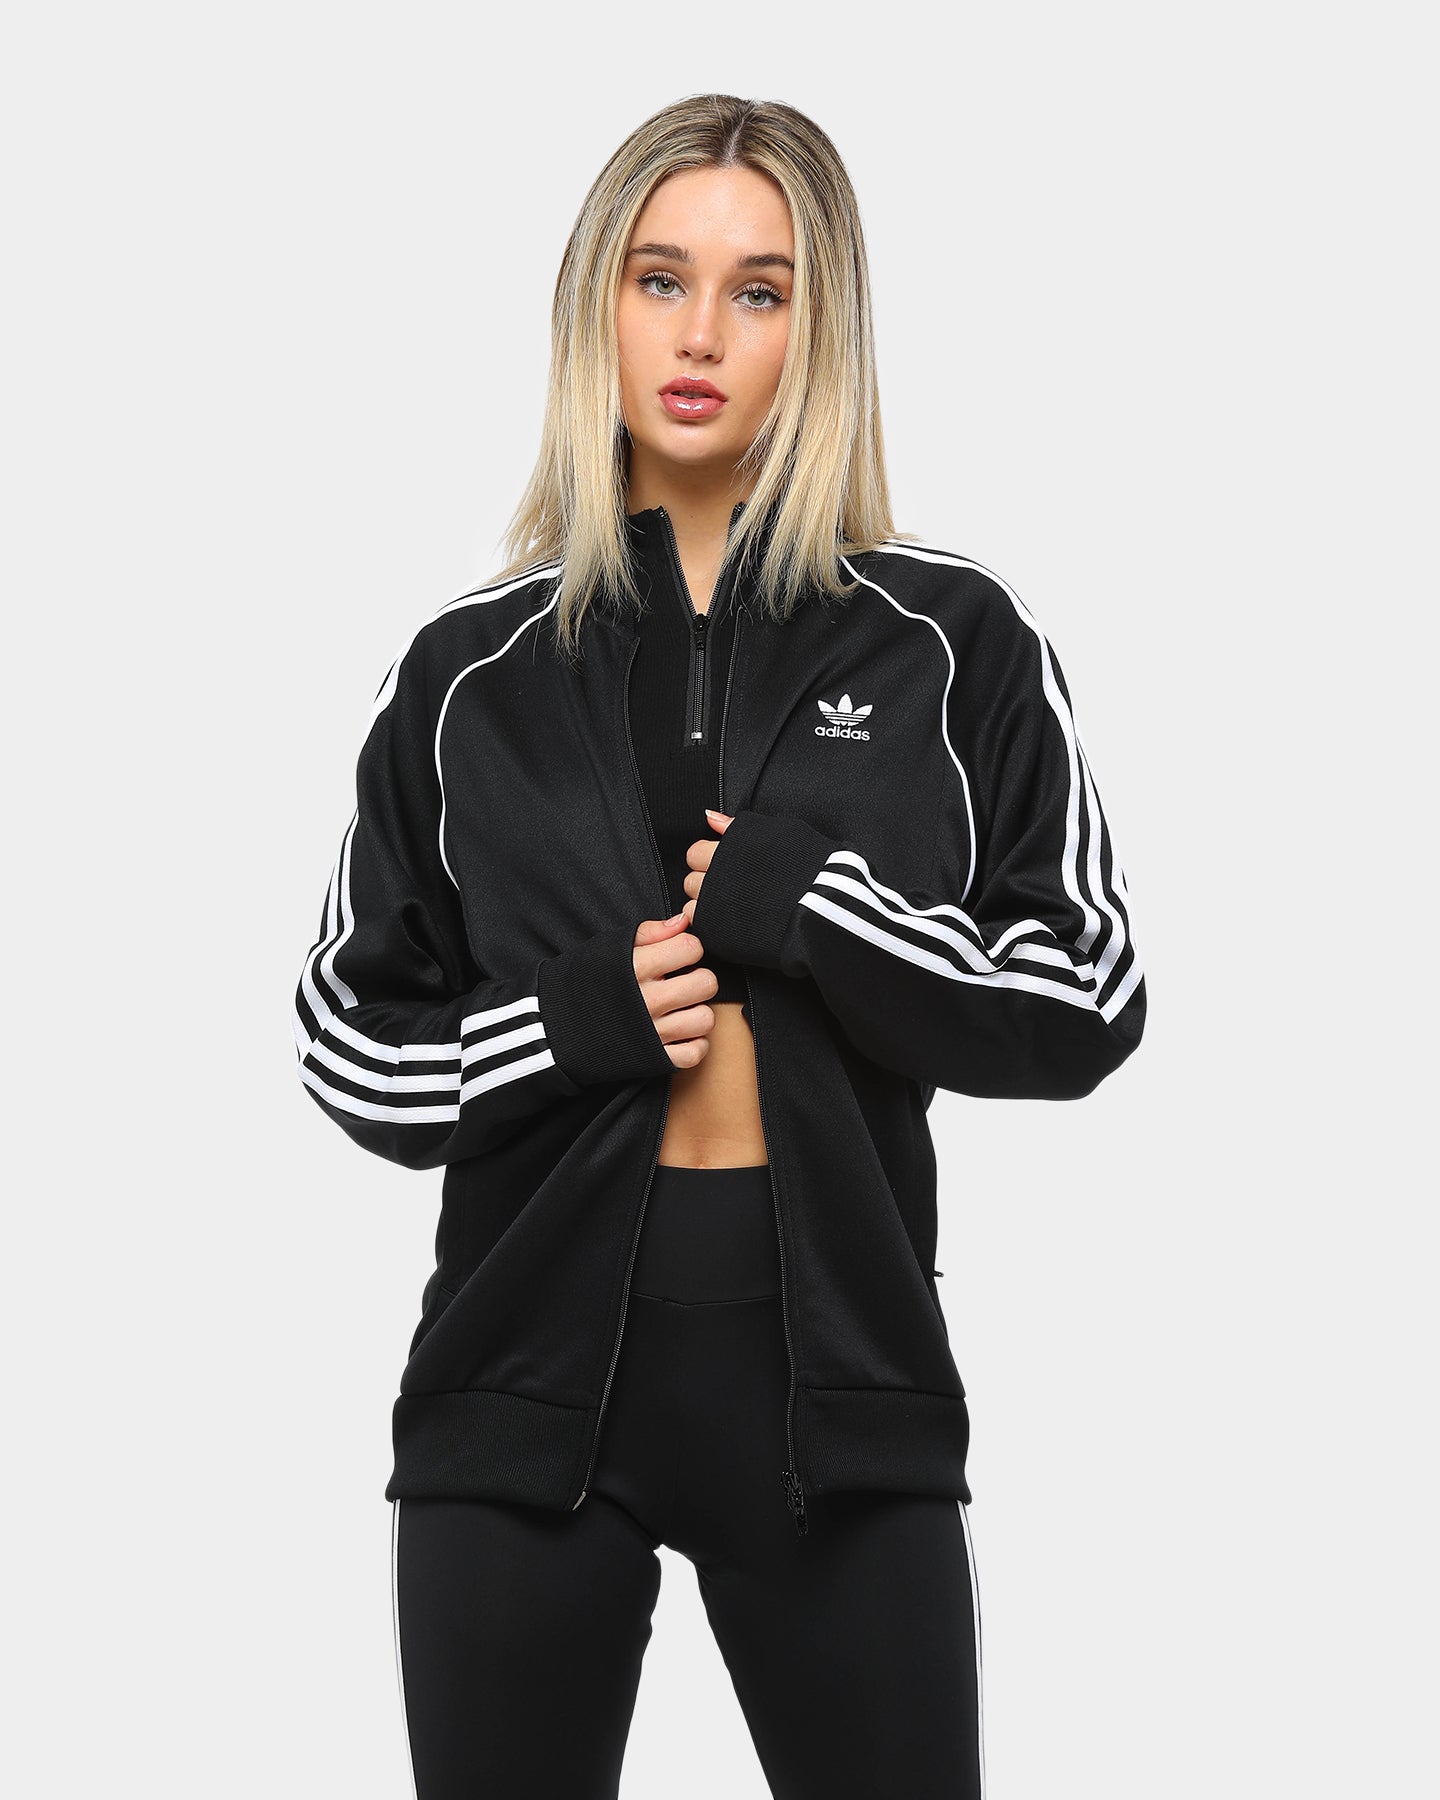 sst track top adidas